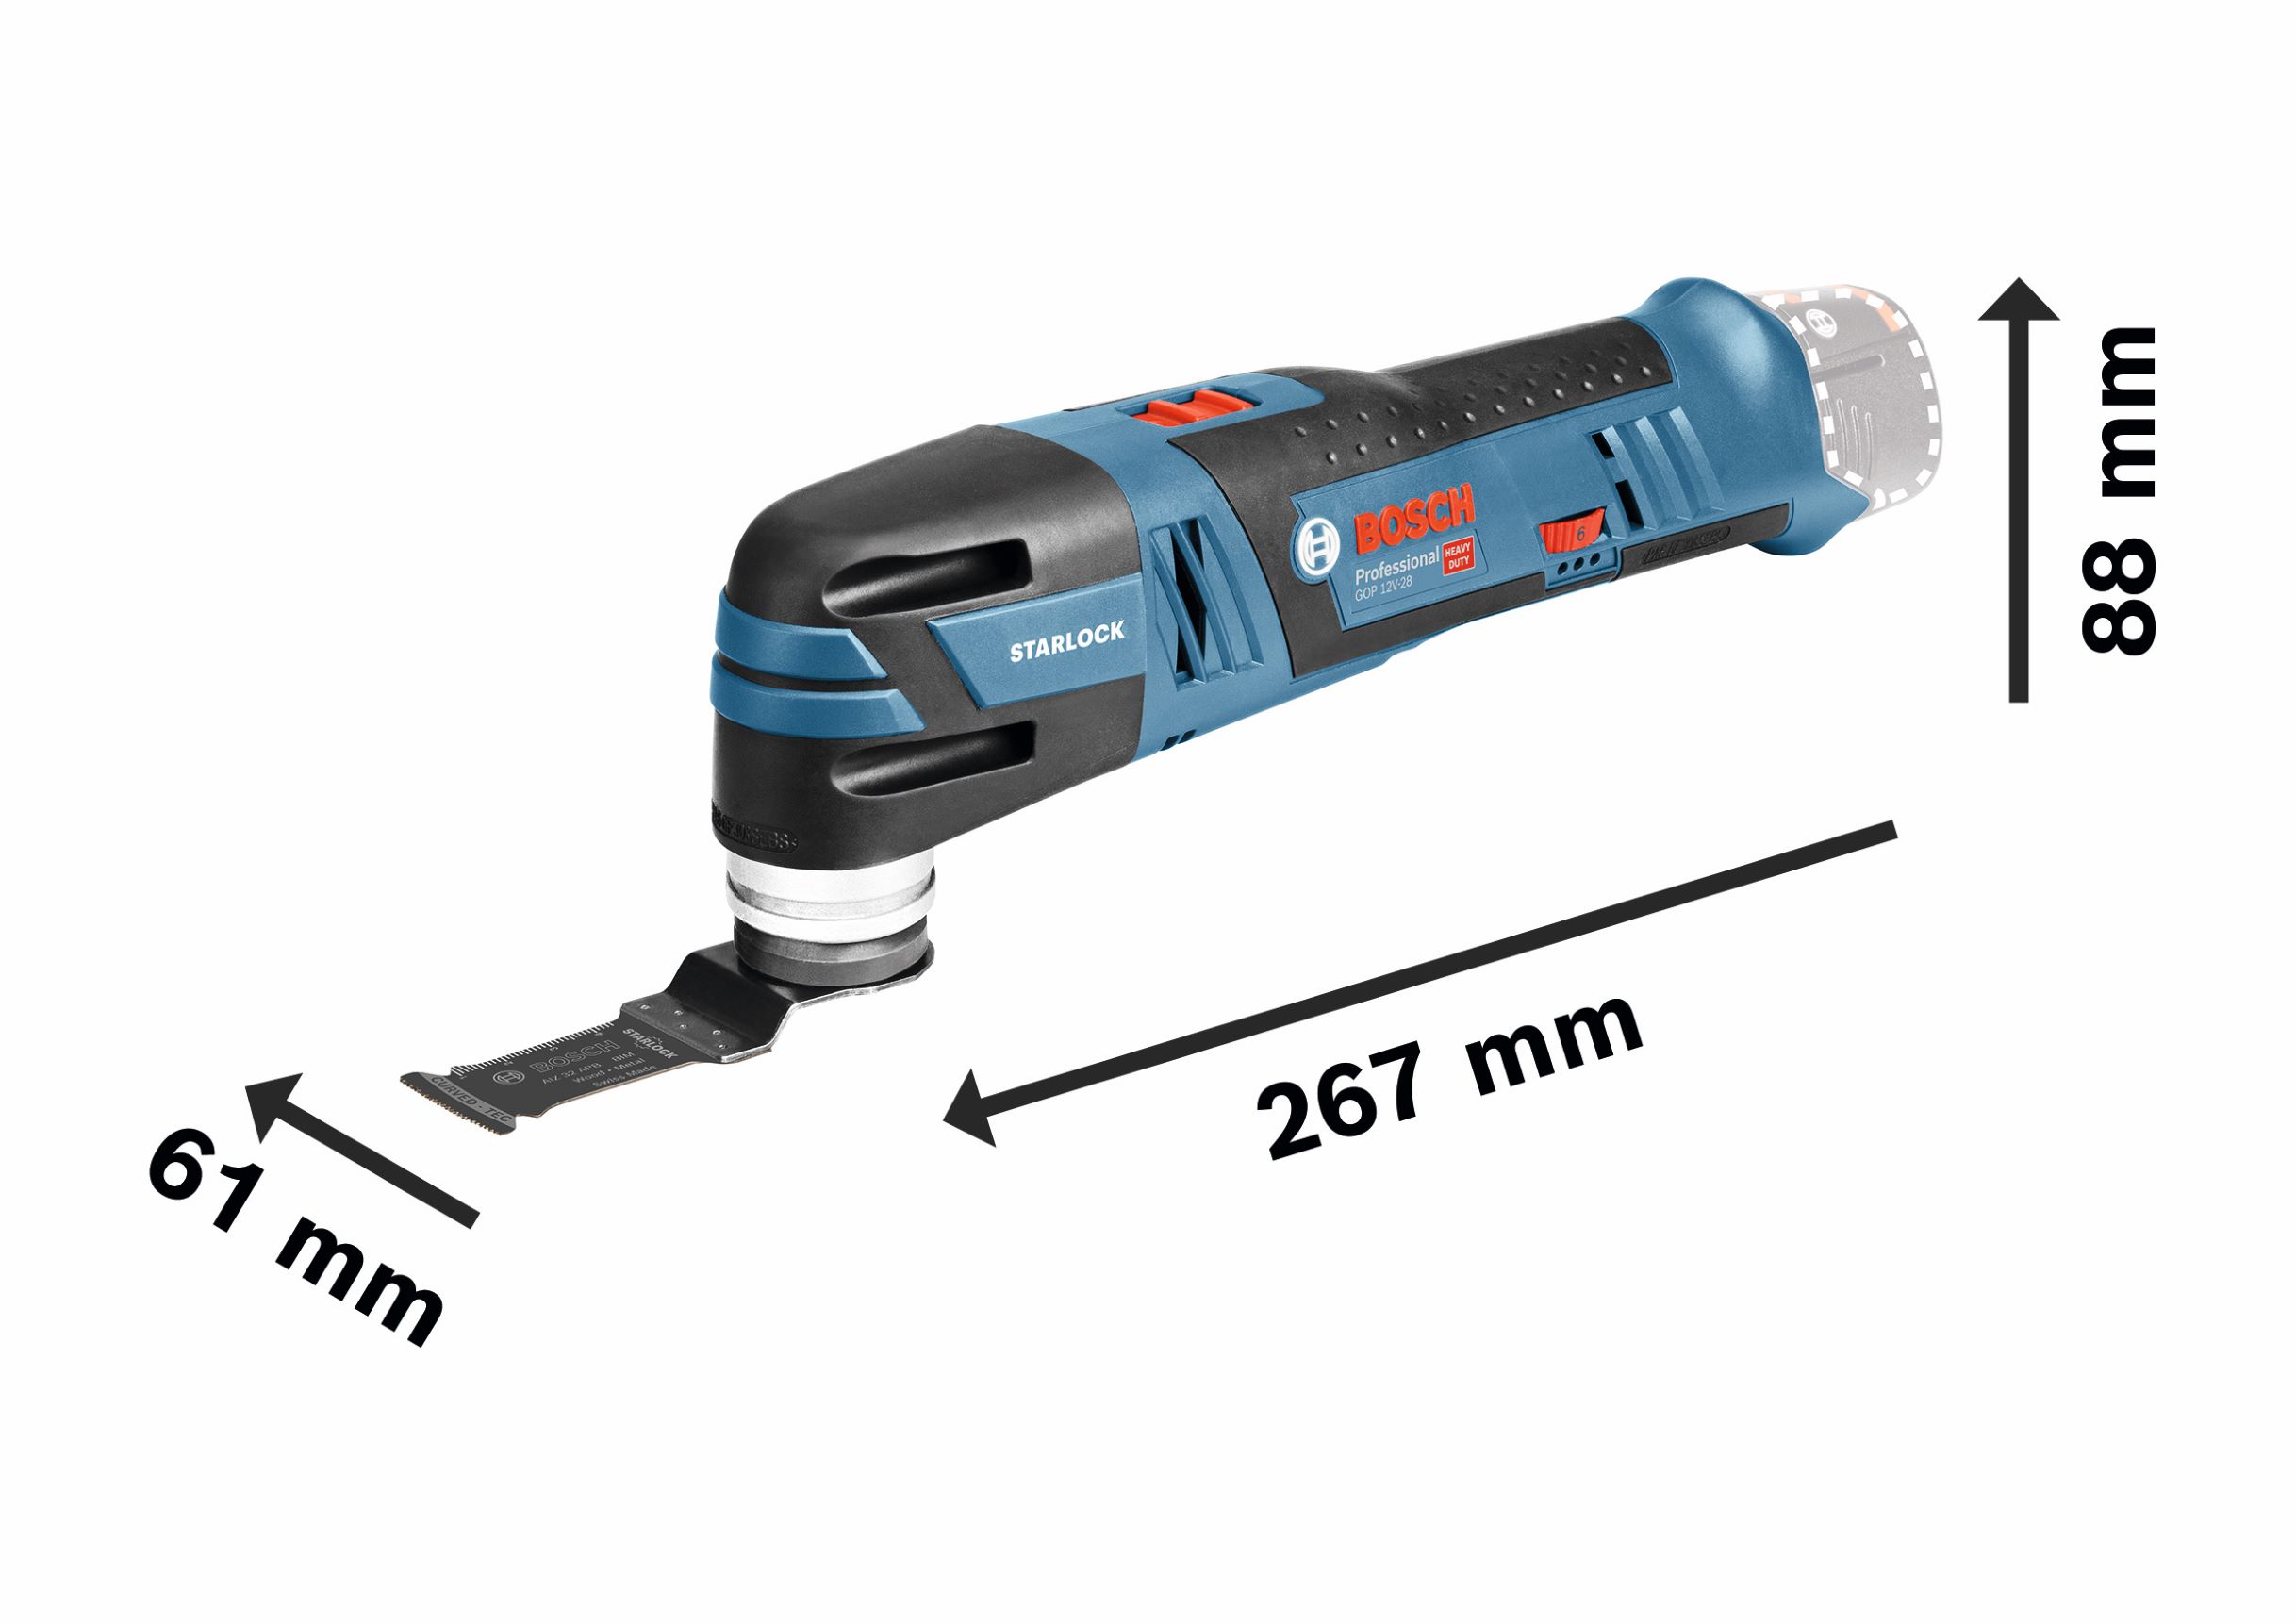 GRO 12V-35 Professional Cordless Rotary Tool in L-Boxx Bosch - 3